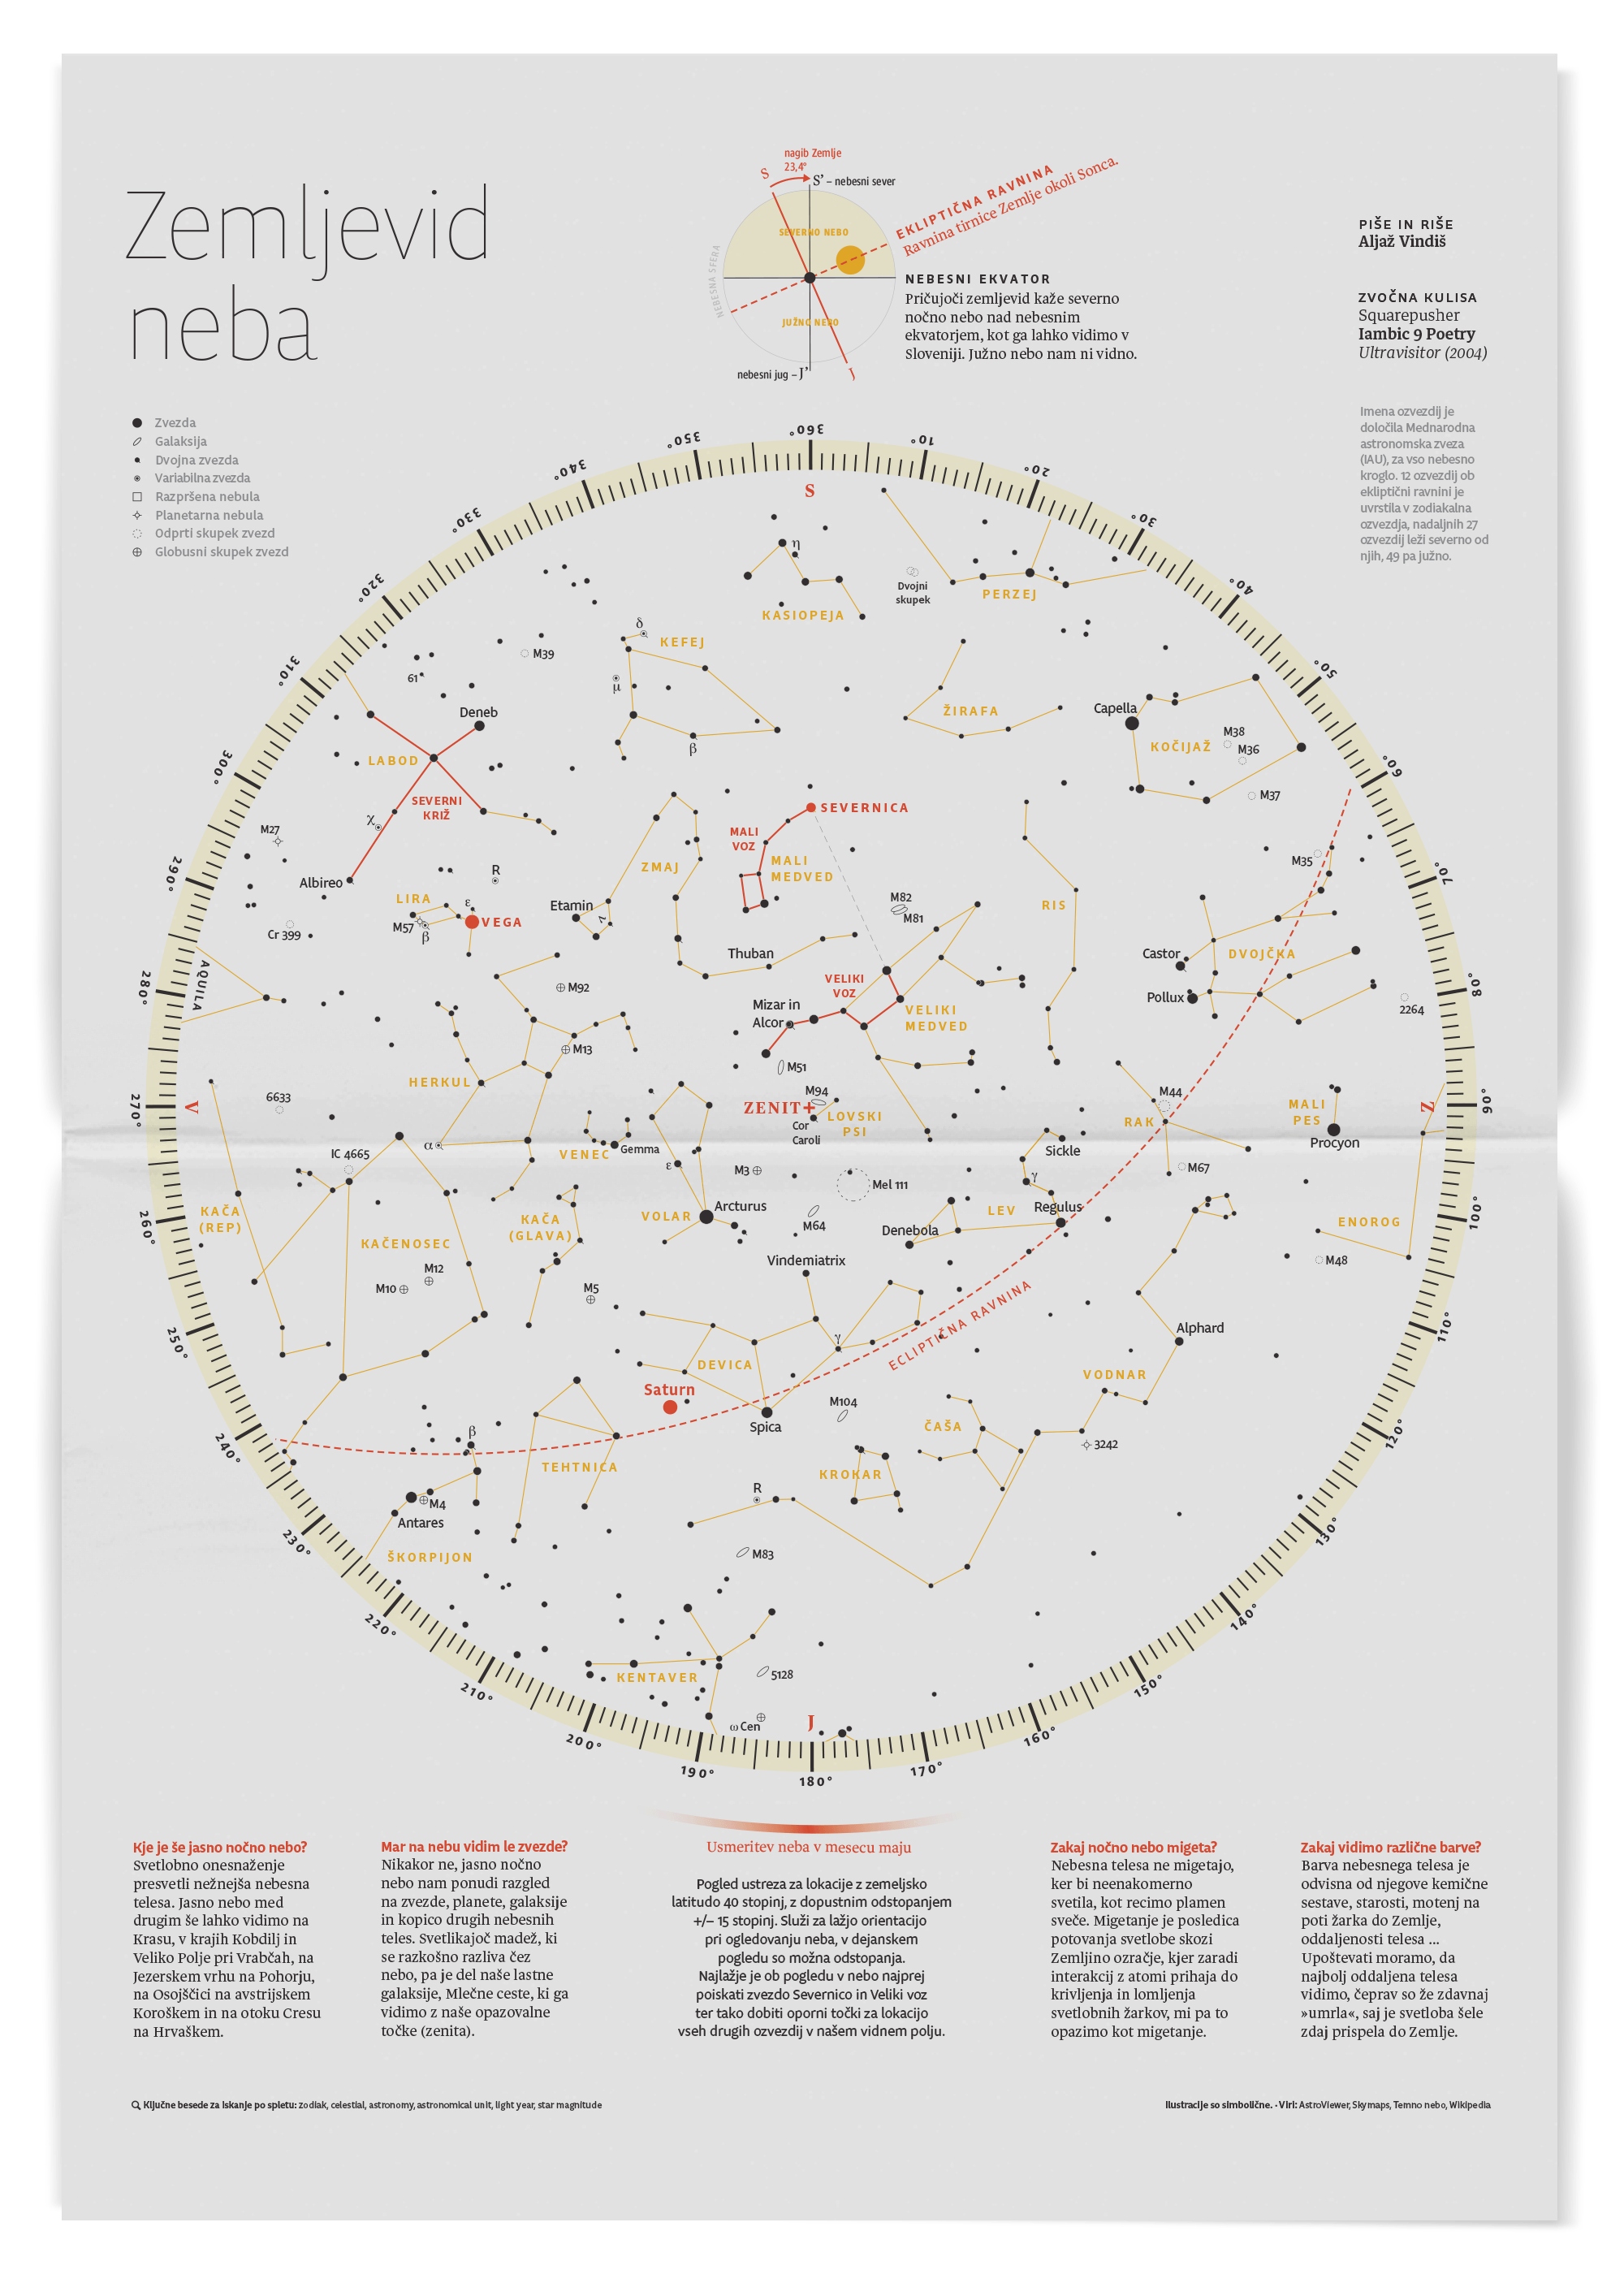 Illustration of constelations on the night sky.